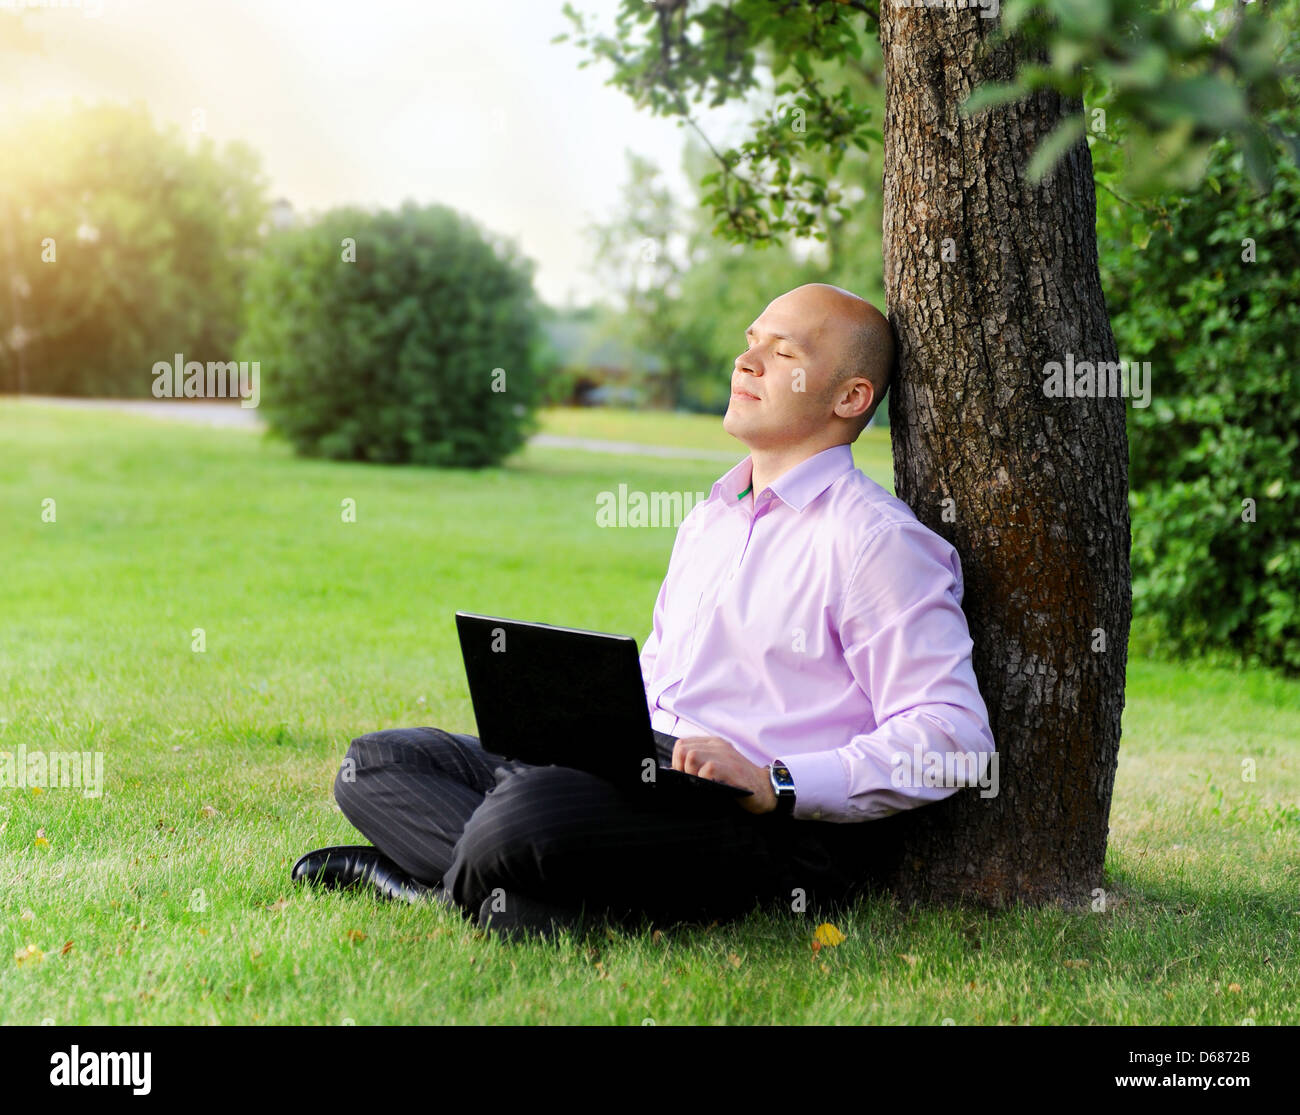 Businessman with laptop sitting near a tree Stock Photo